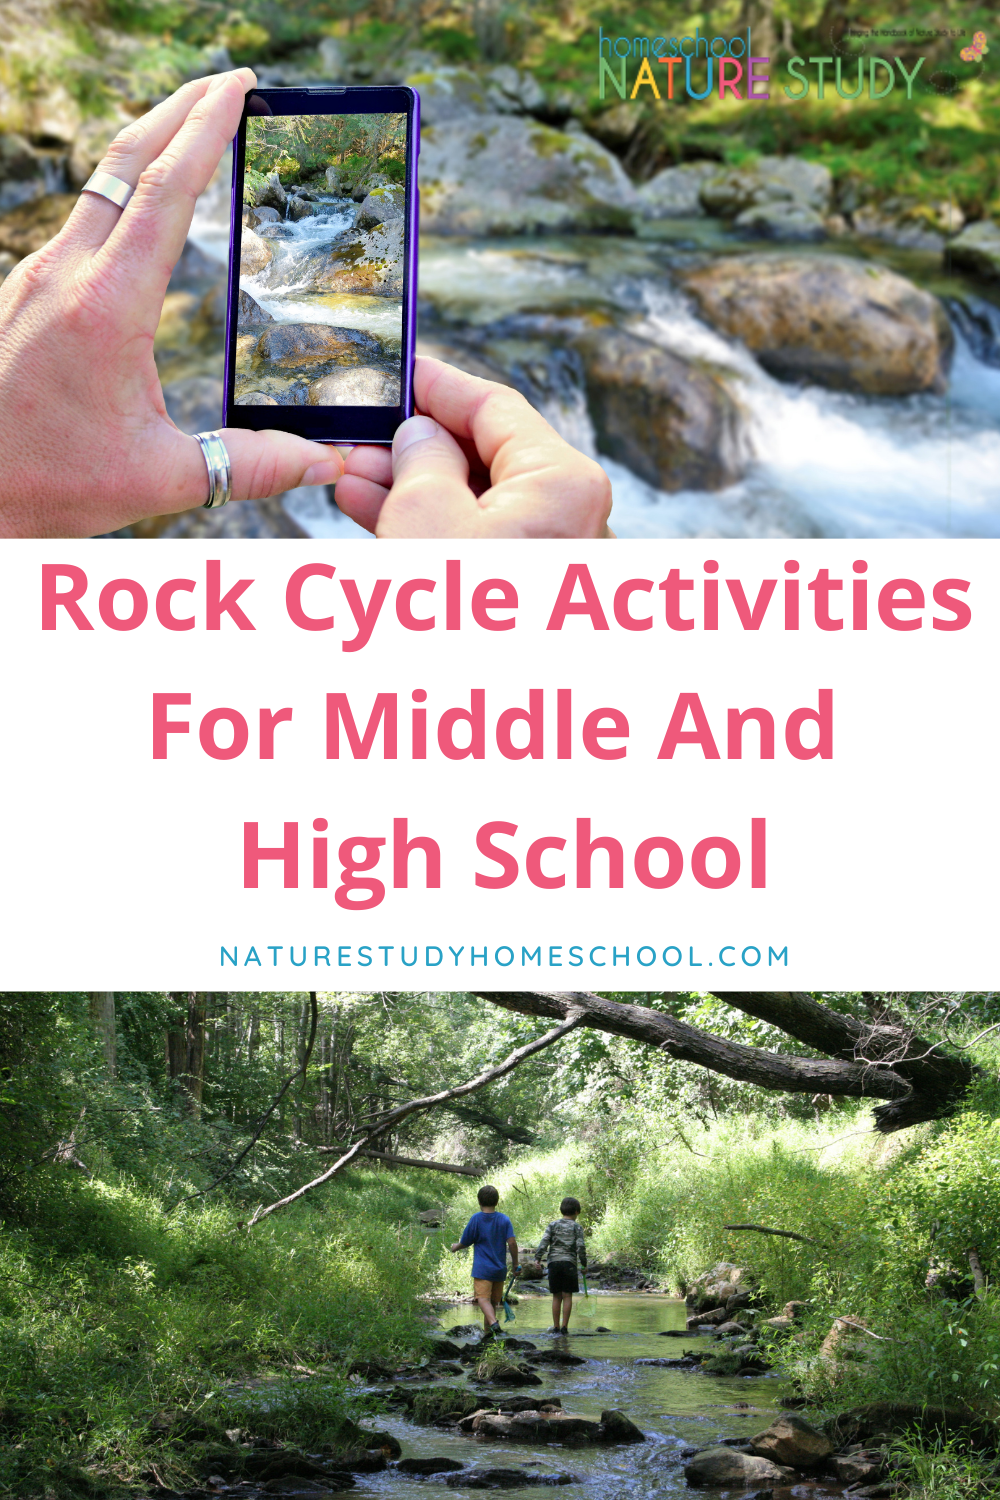 An introduction to geology with rock cycle activities for middle and high school. A great way to explore rocks as a backyard homeschool nature study!